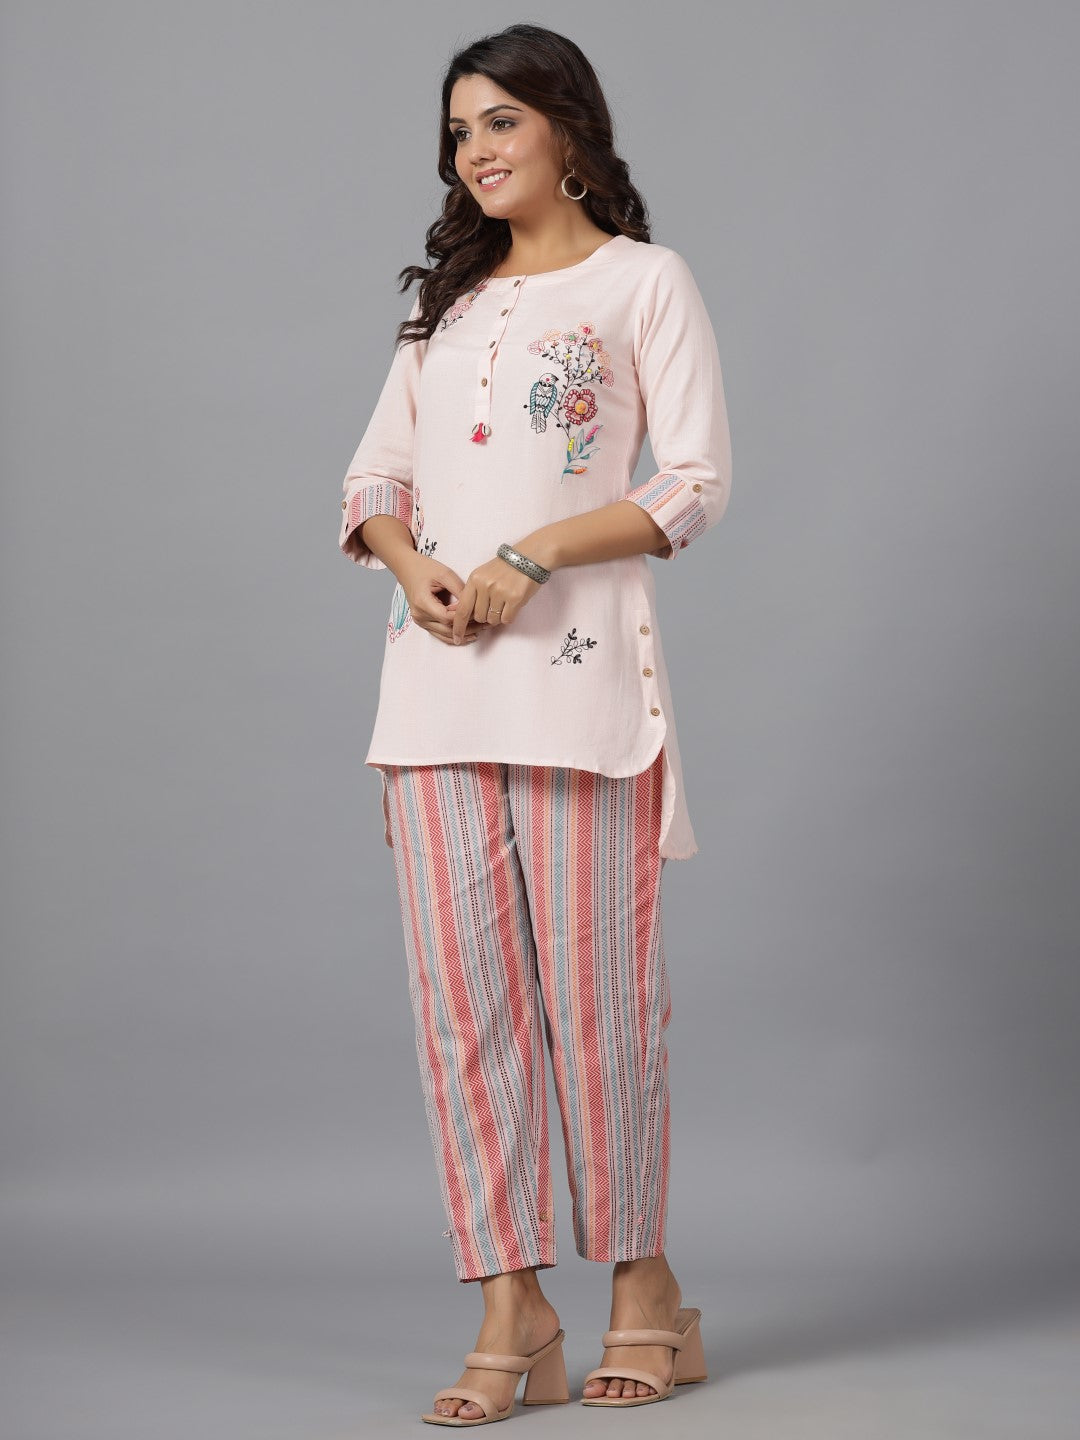 Juniper The Dhara Pink Rayon Top 7 Pants Co-Ord Set With Multi Color Embroidery Contrast Beads & Tassels